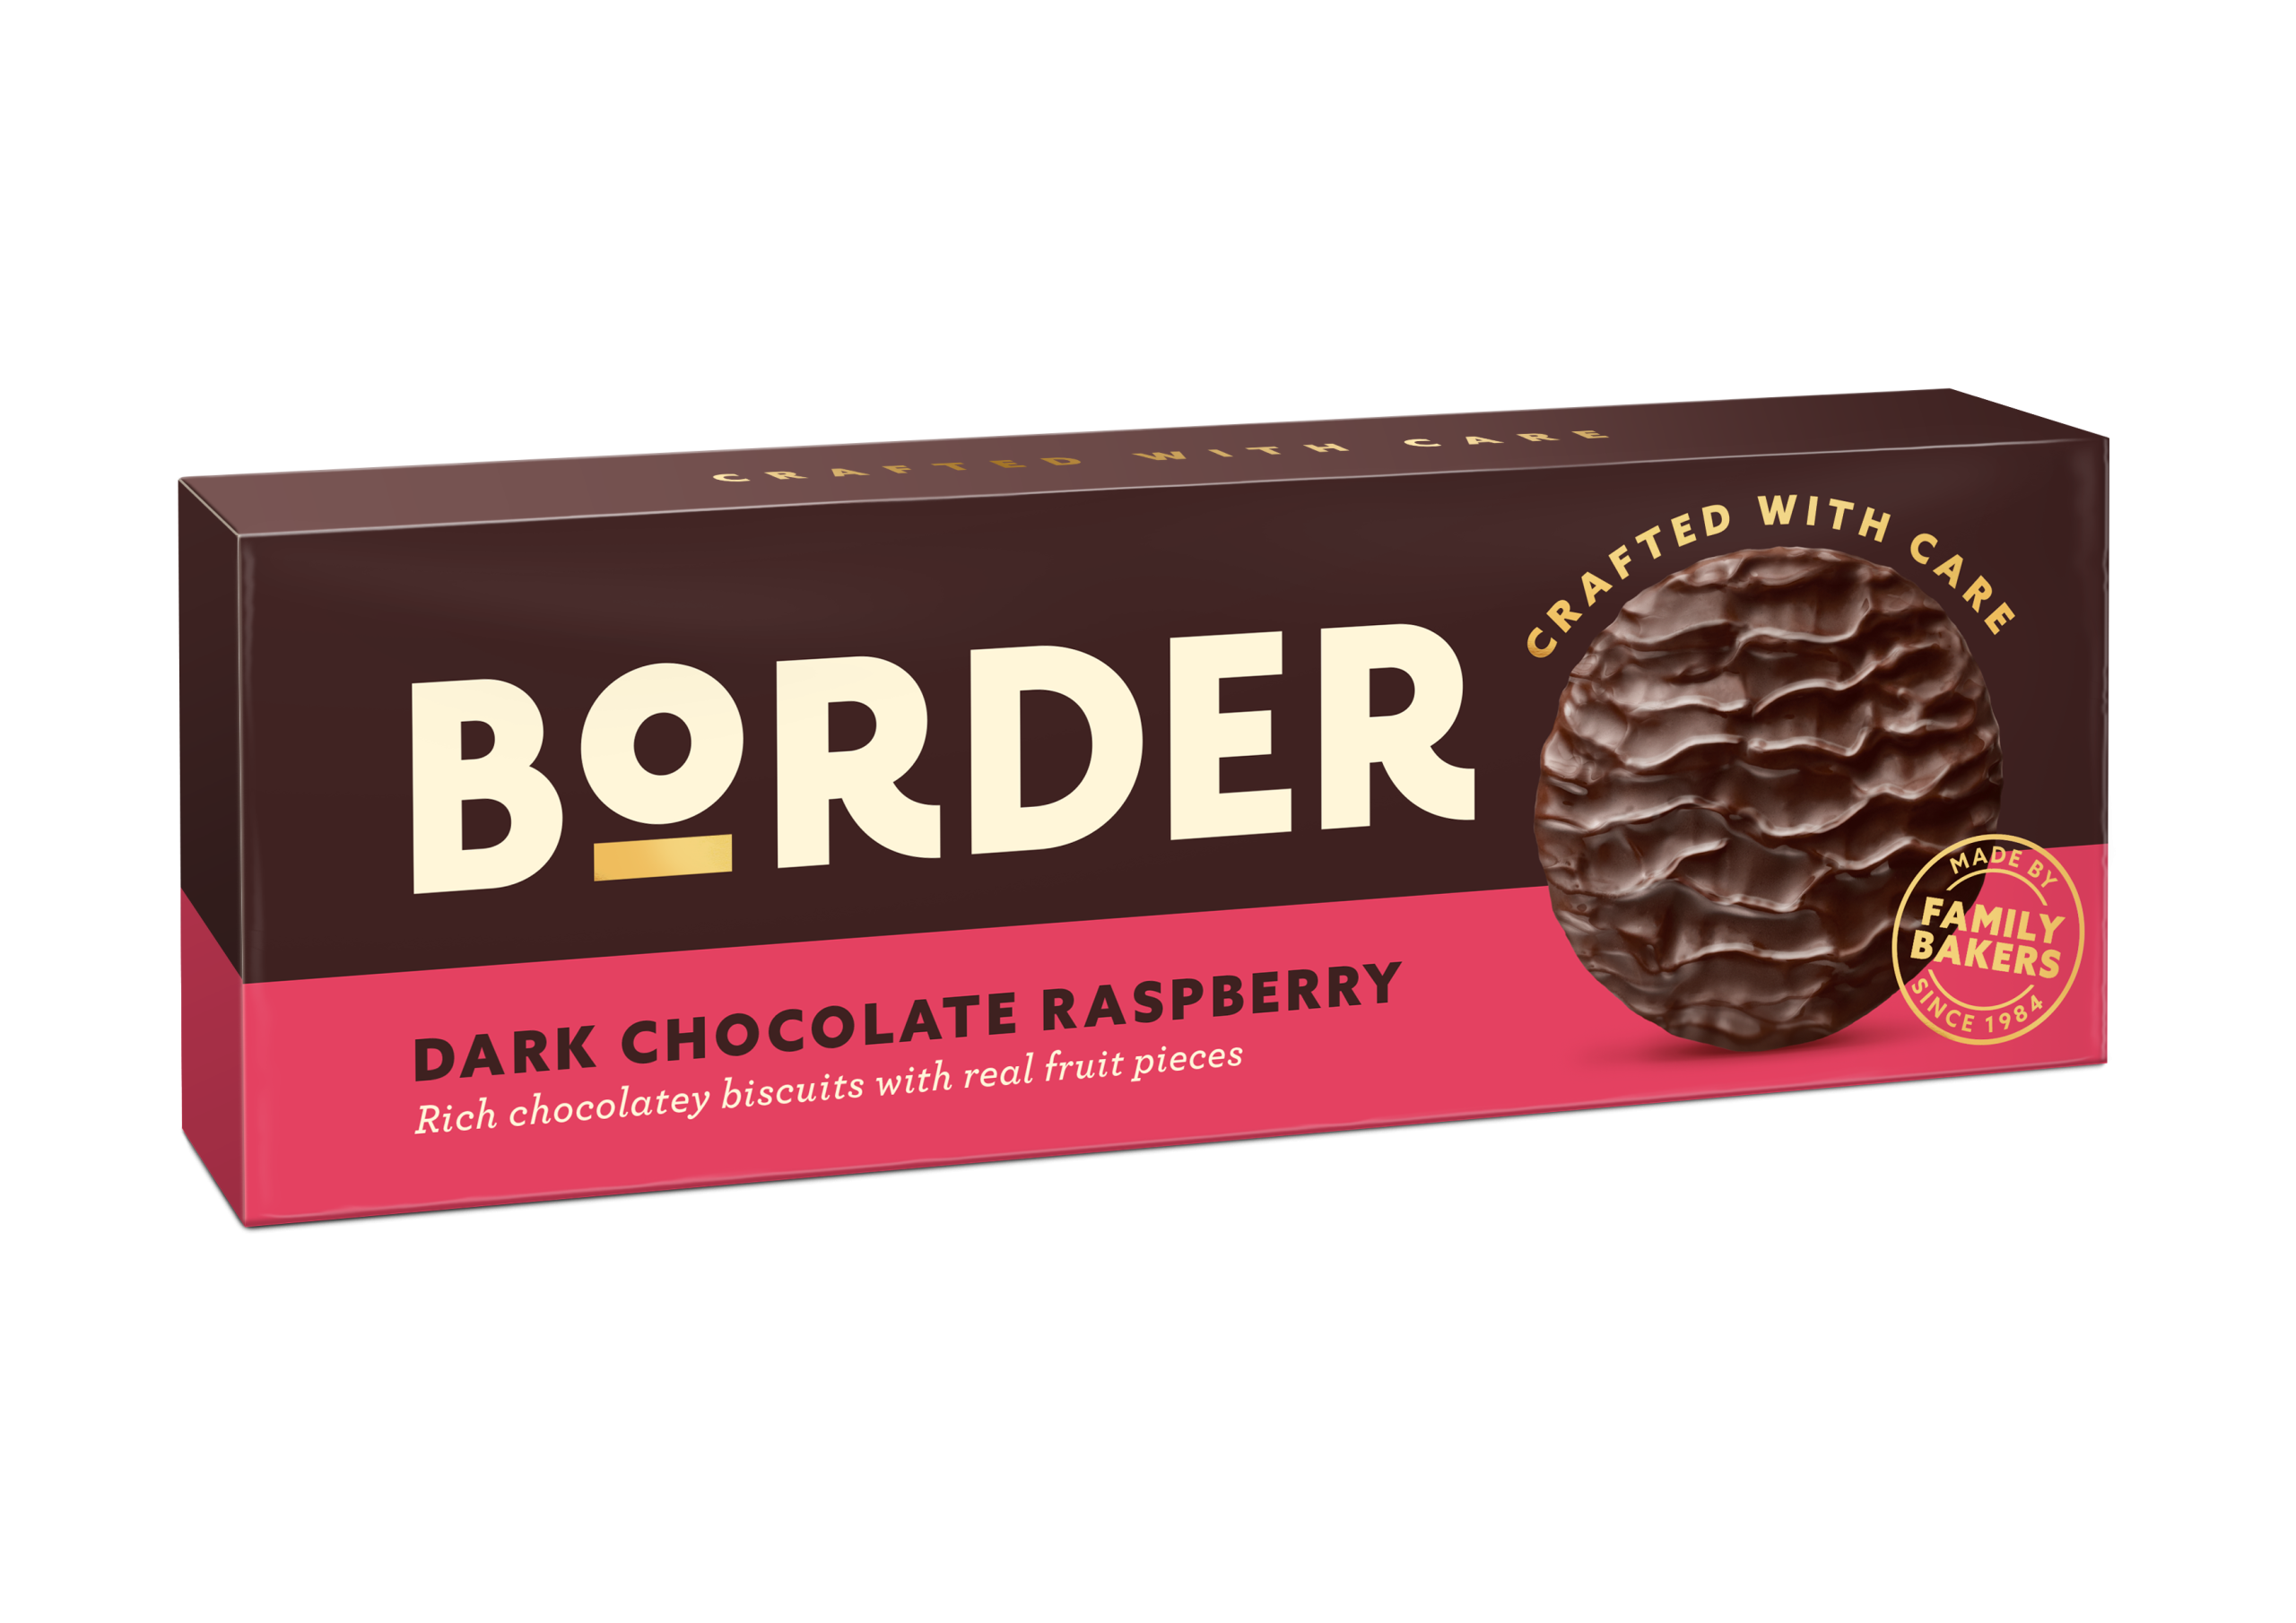 Border unveils new look and £190 million category opportunity